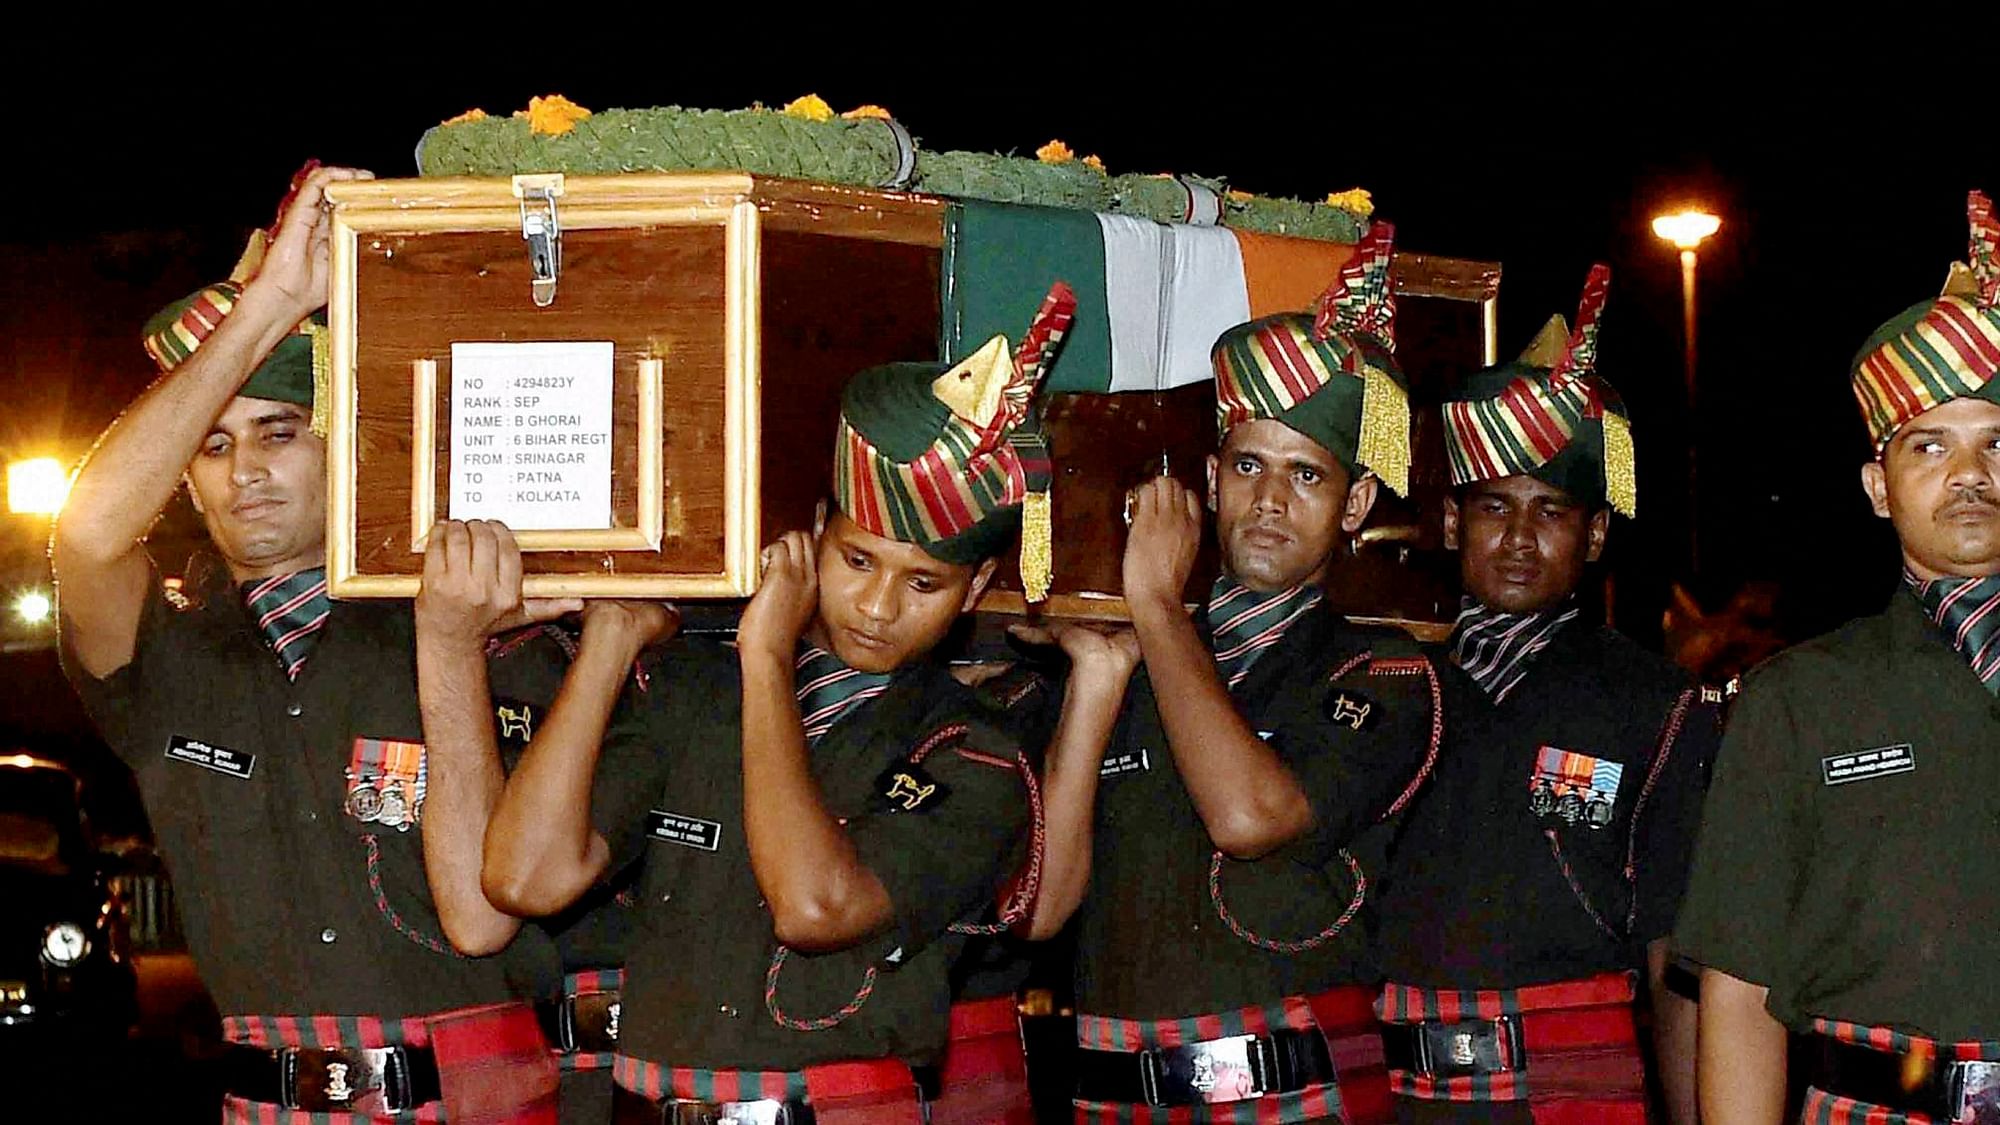 Army jawans carry the body a martyr killed in Uri attacks. (Photo: PTI)